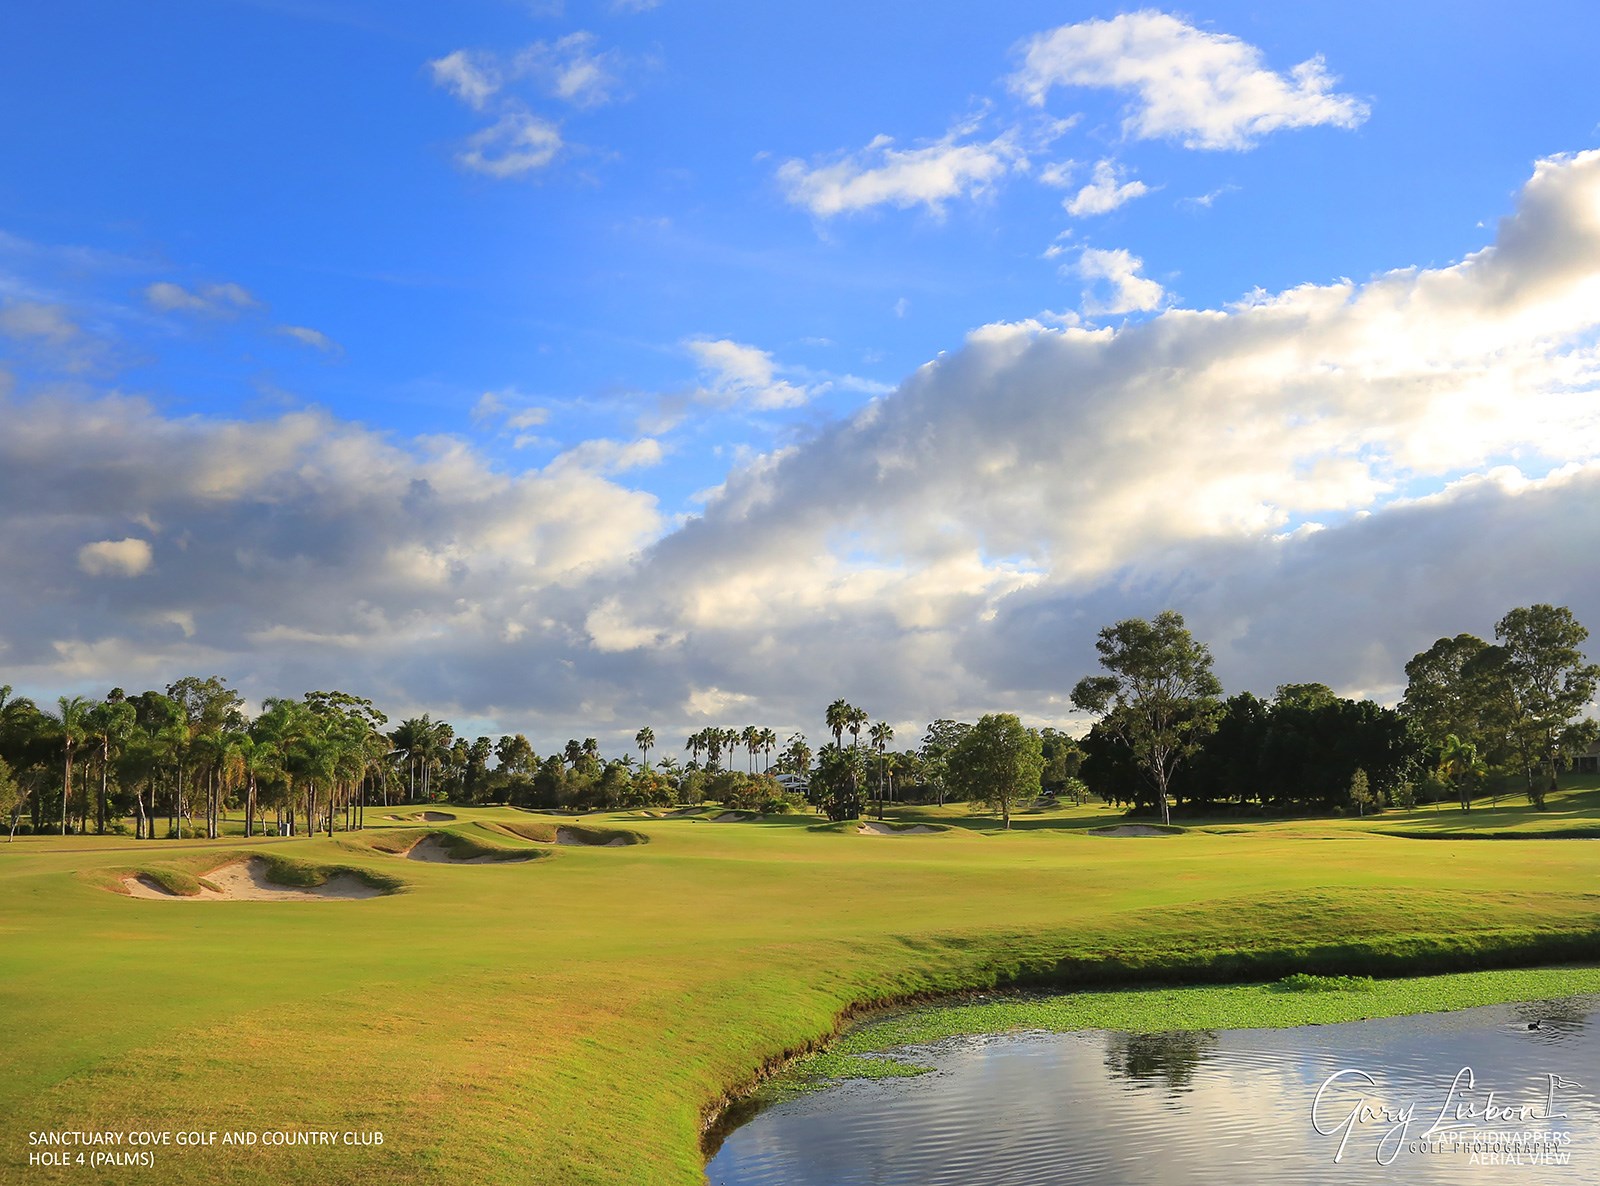 Sanctuary Cove Golf and Country Club - The Palms Hole 4